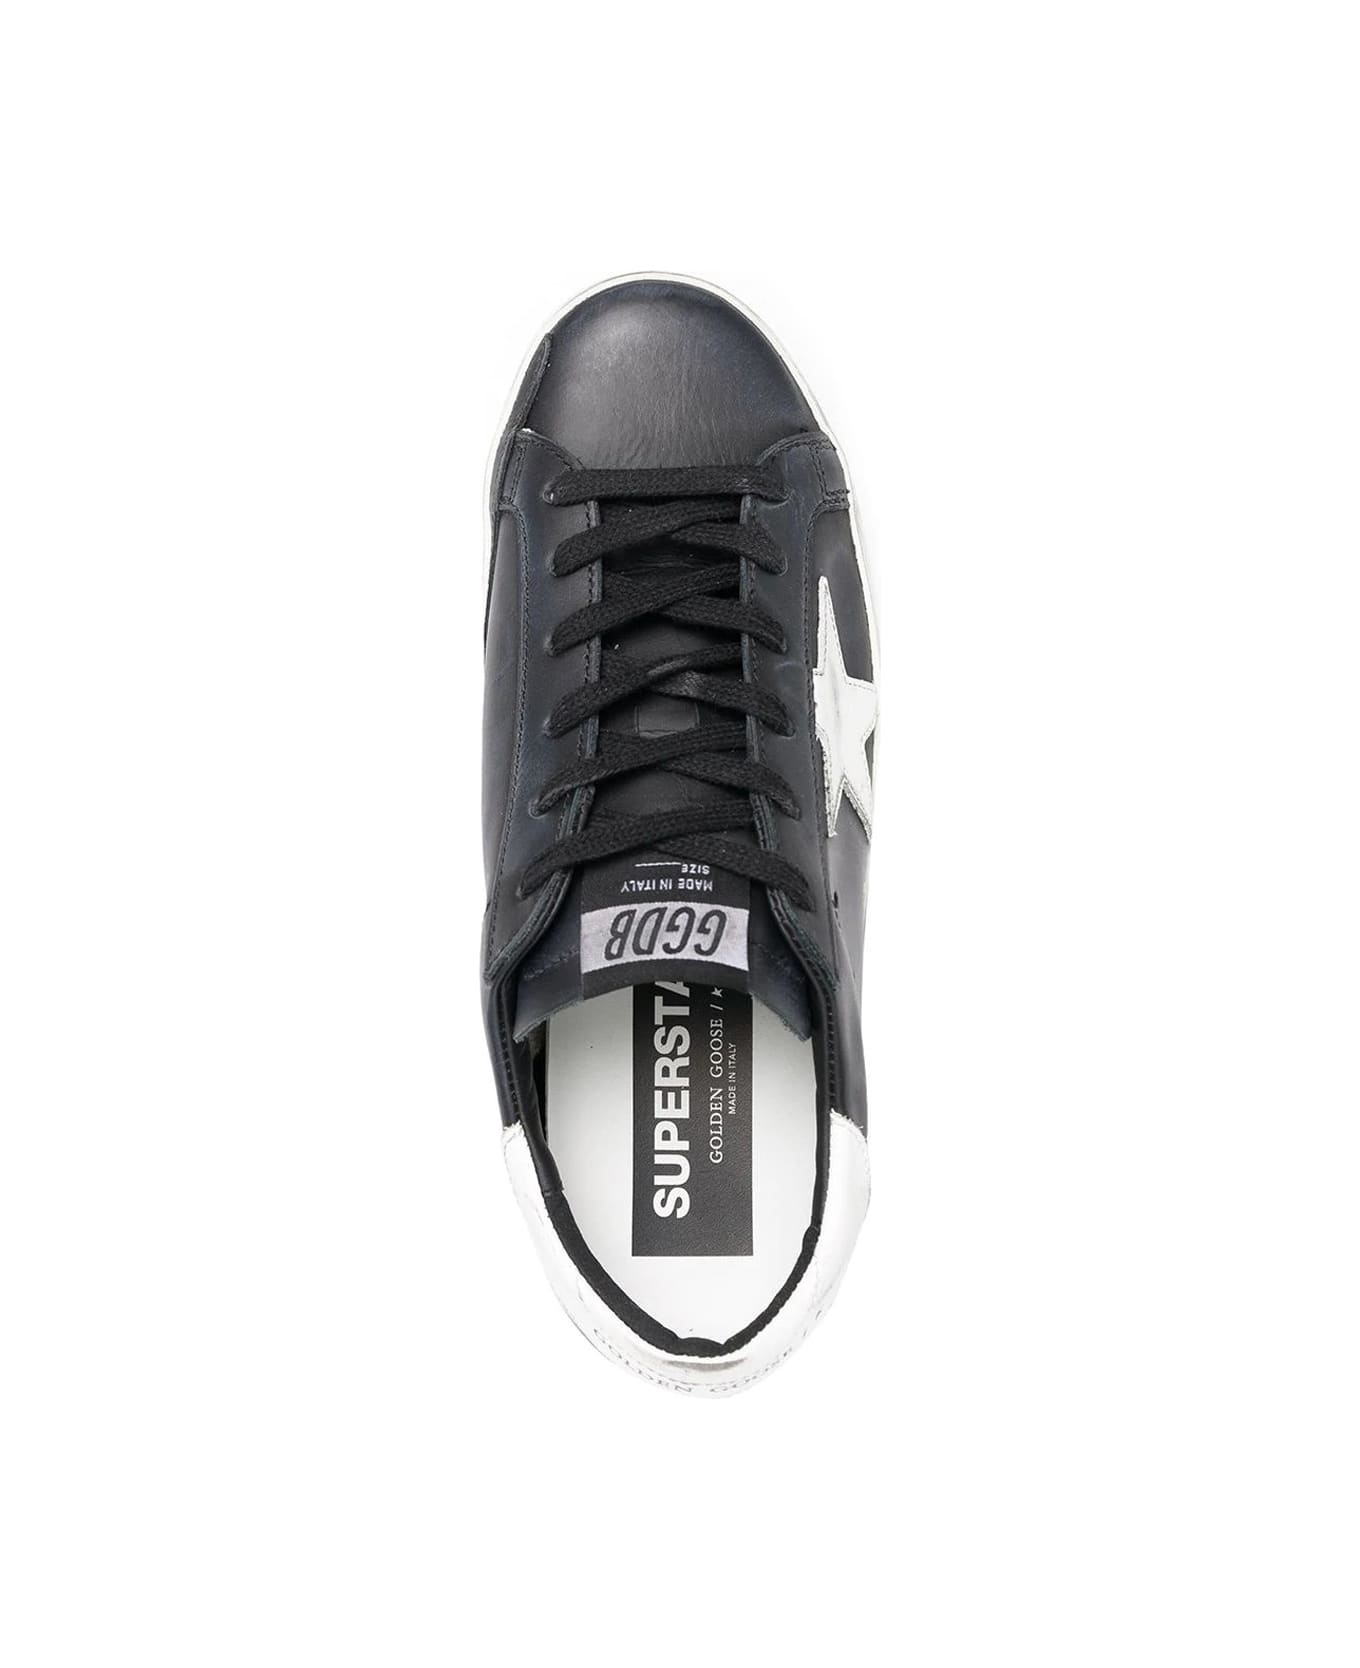 Golden Goose Super-star  Leather Upper Shiny Leather Star And Heel - Black White